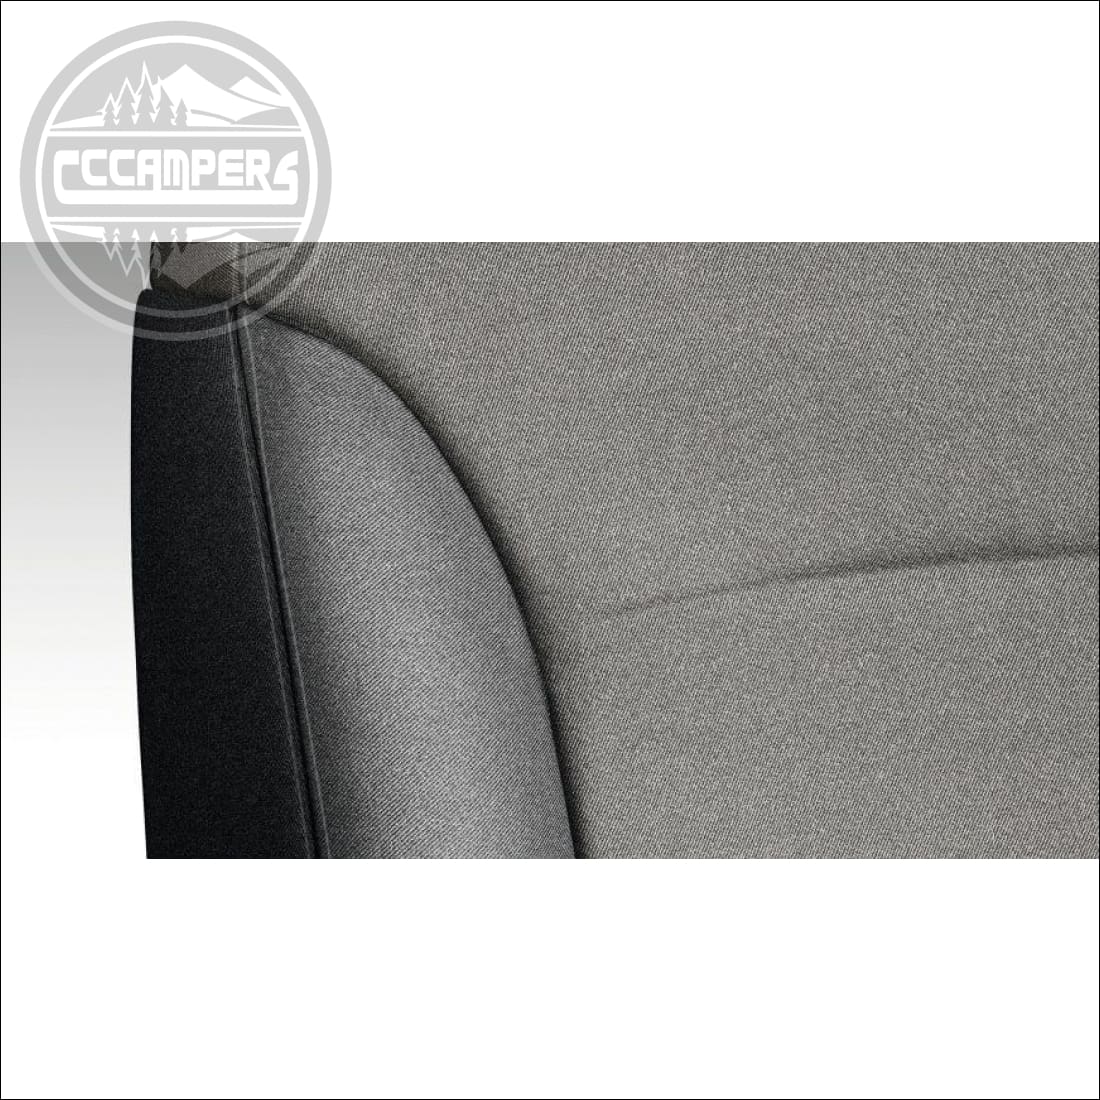 2014 on Renualt Trafic and Nissan NV300 Genuine OEM Fabric Material Cloth match to front seats - cccampers.myshopify.com